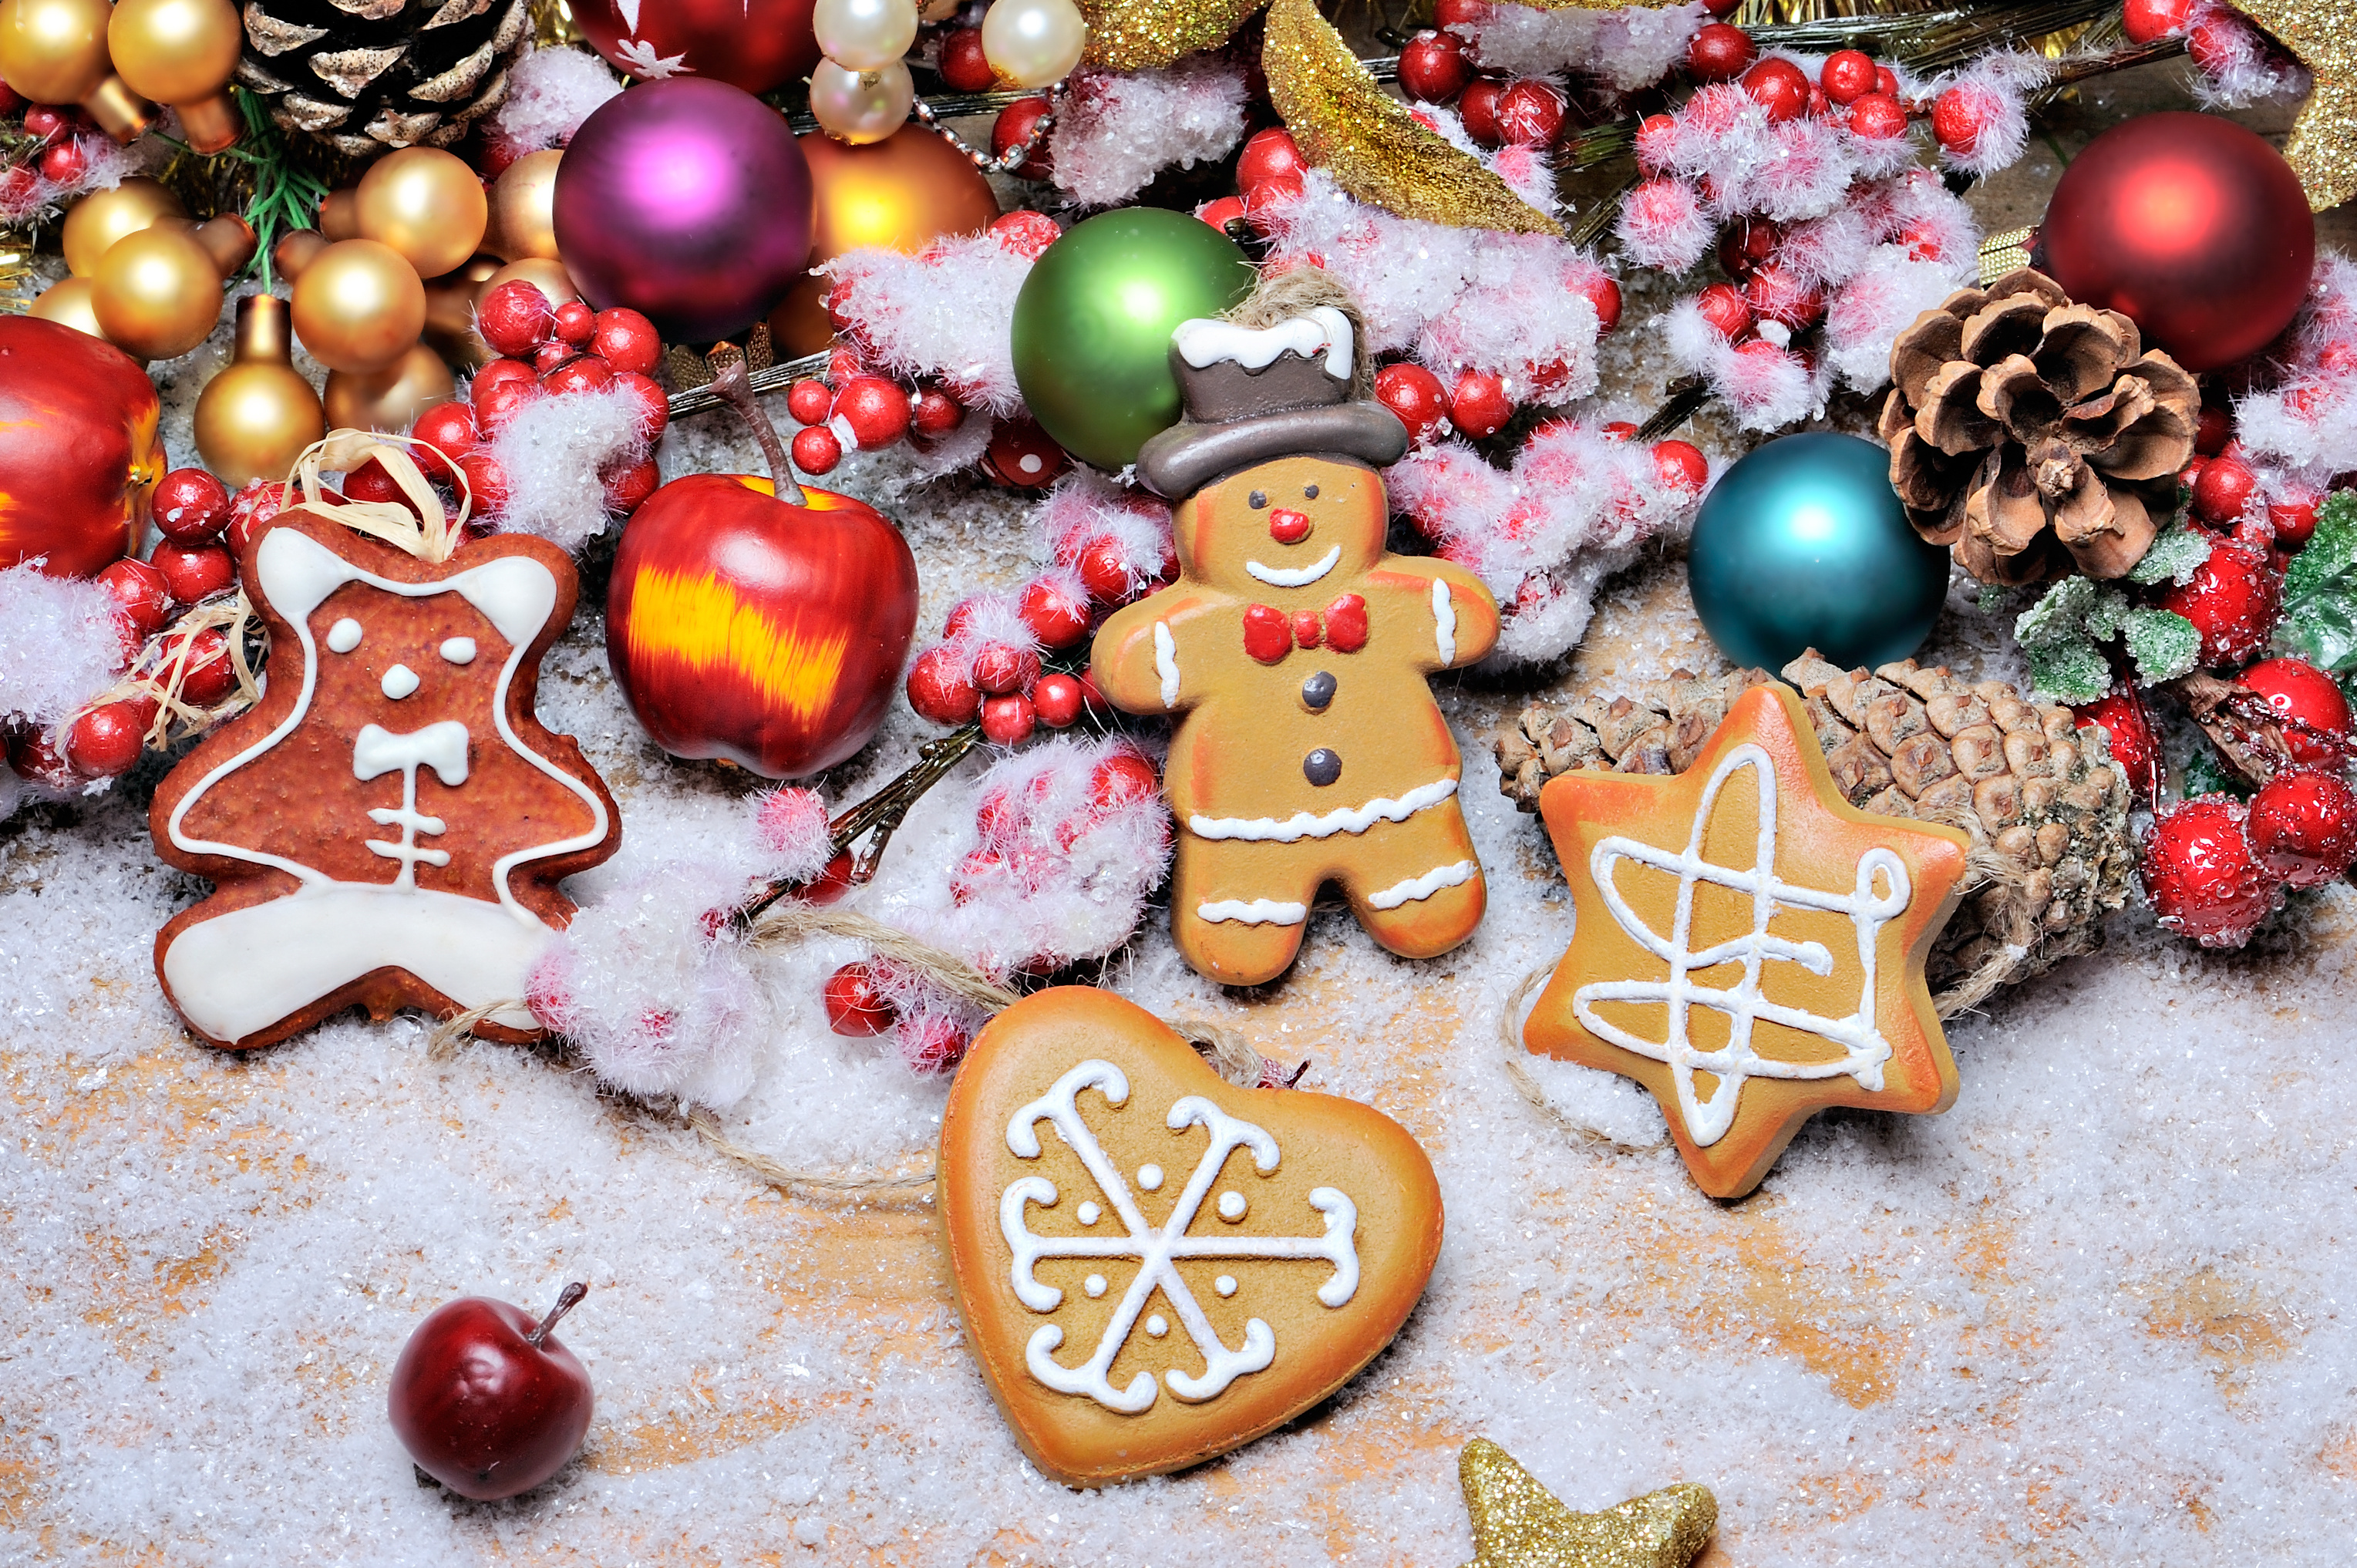 Christmas Christmas Ornaments Cookie Gingerbread 3057x2034